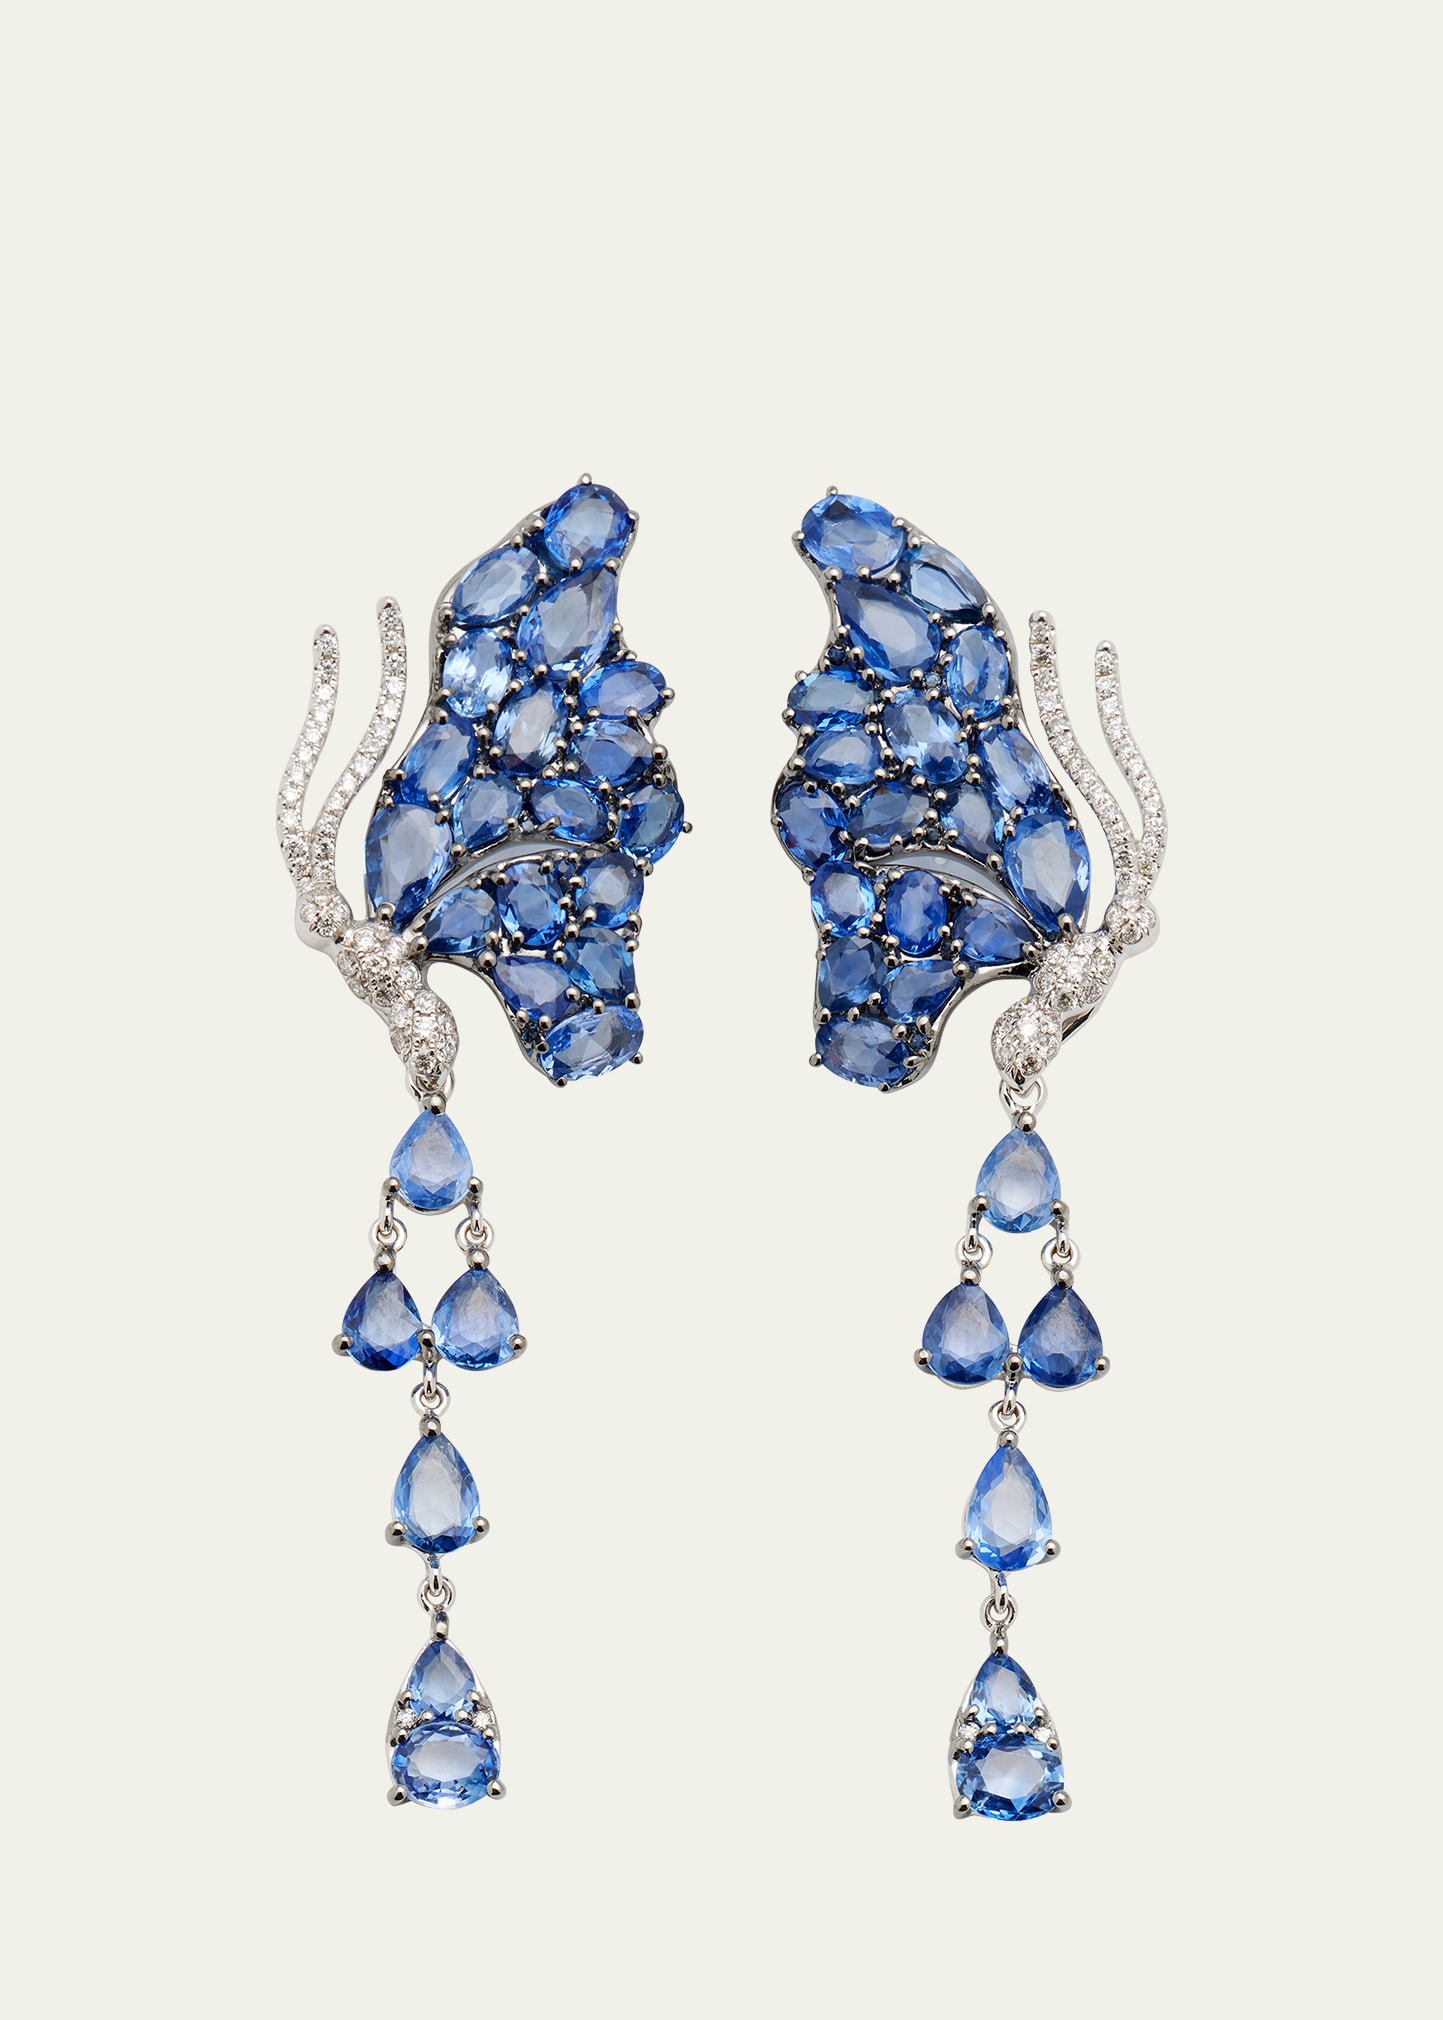 White Gold Blue Sapphire and White Diamond Earrings from The Butterfly Collection